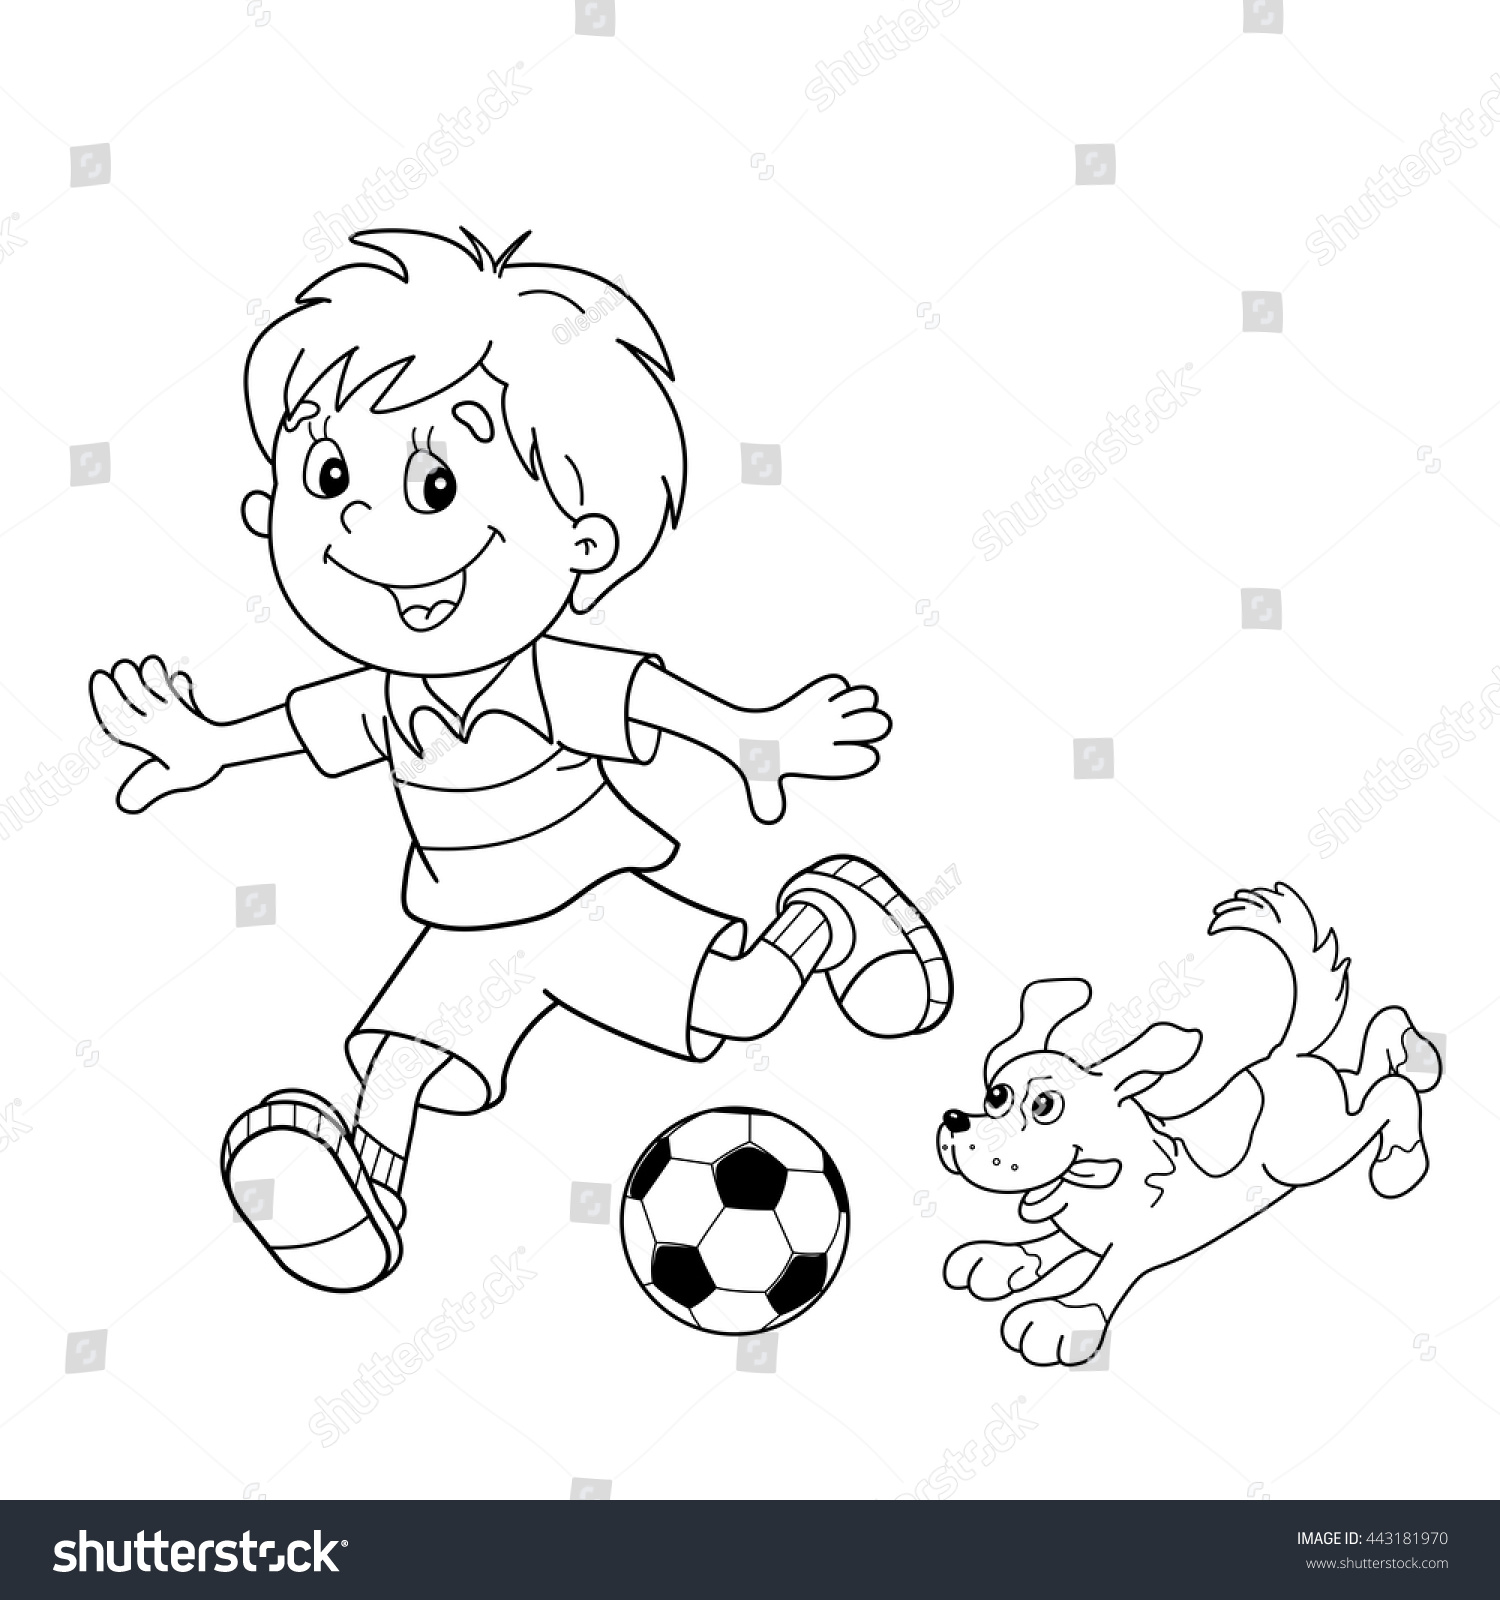 Coloring page outline cartoon boy soccer stock vector royalty free